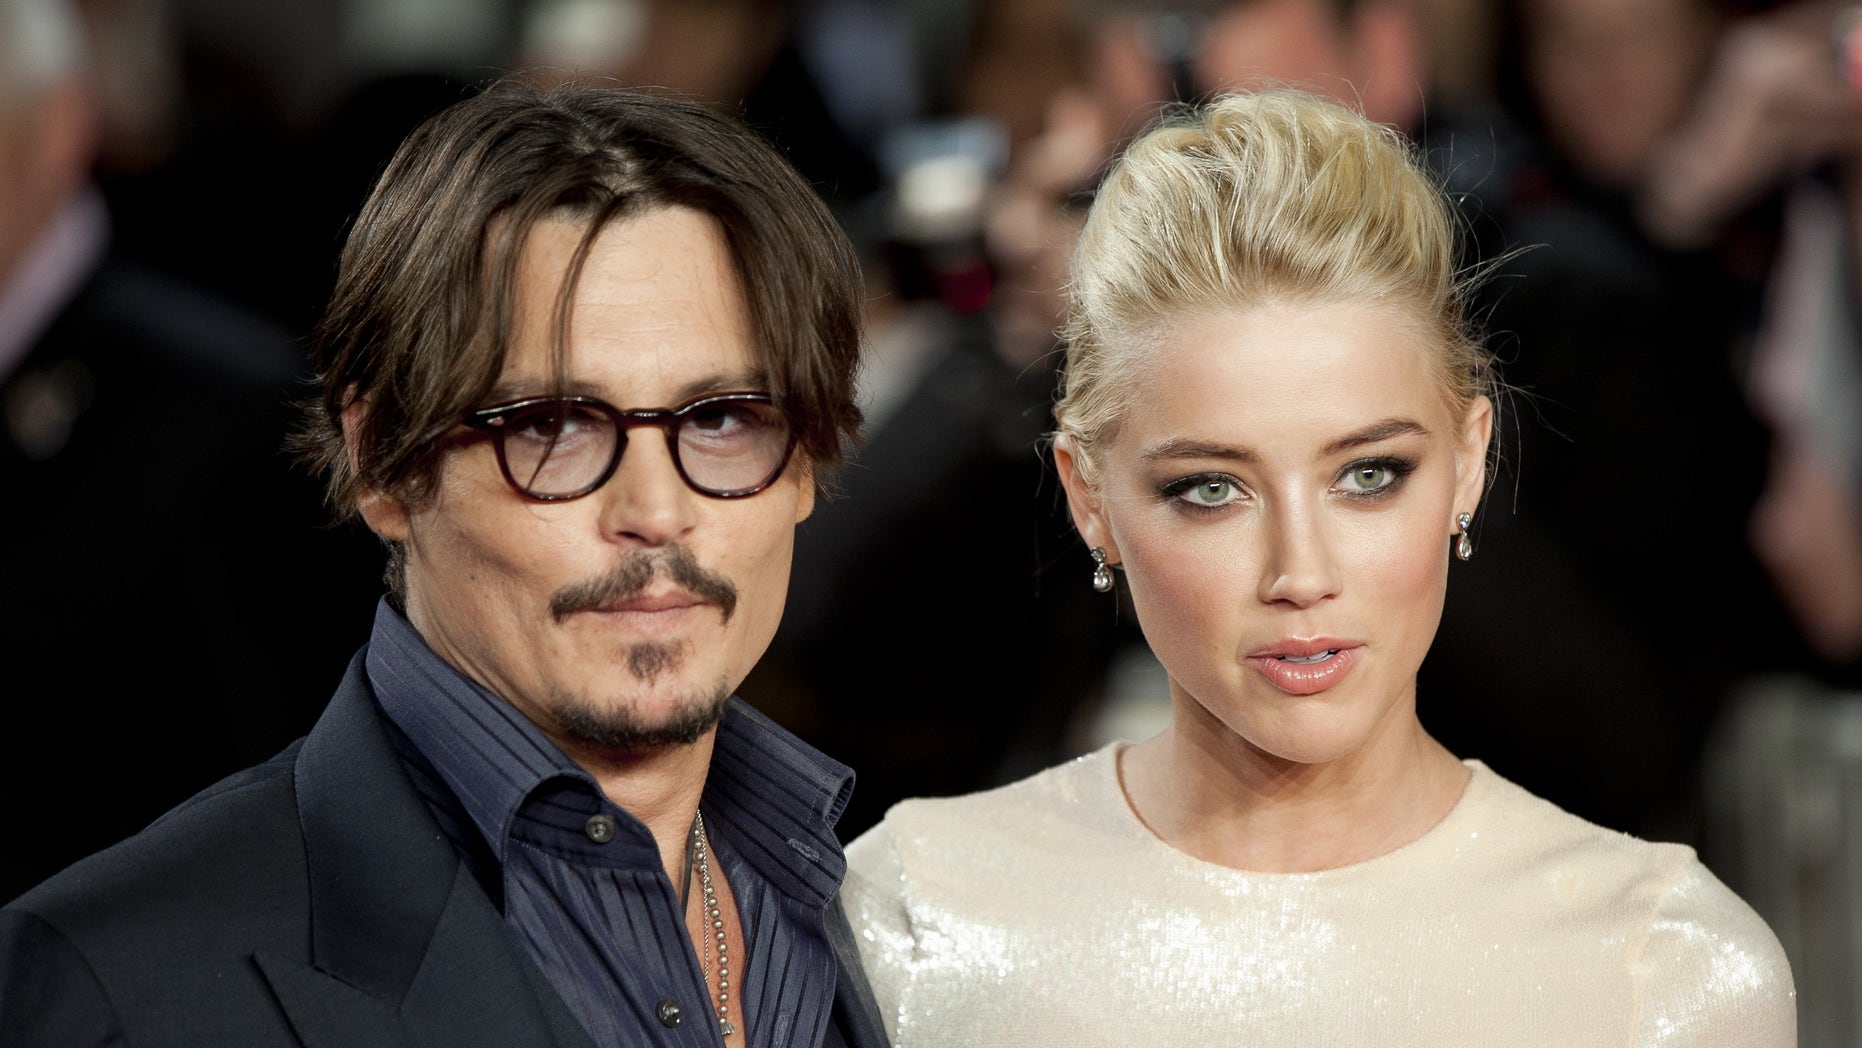 Amber Heard's relationship to Johnny Depp exposed in court